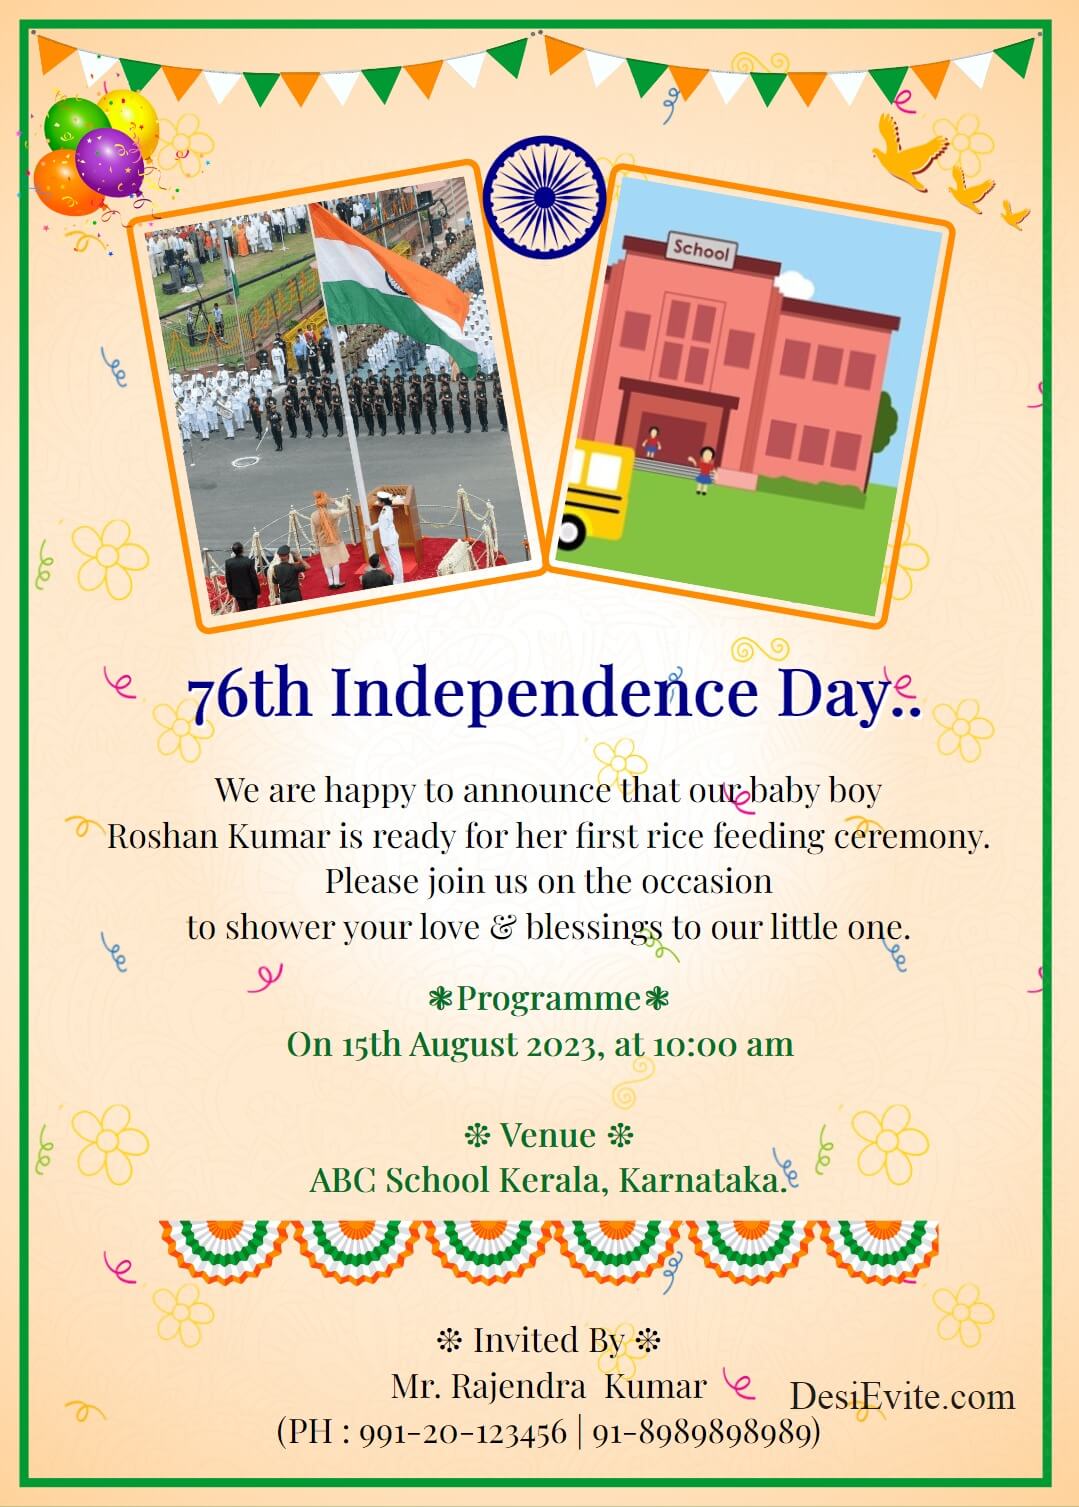 Independence Day Invitation card with 2 photo